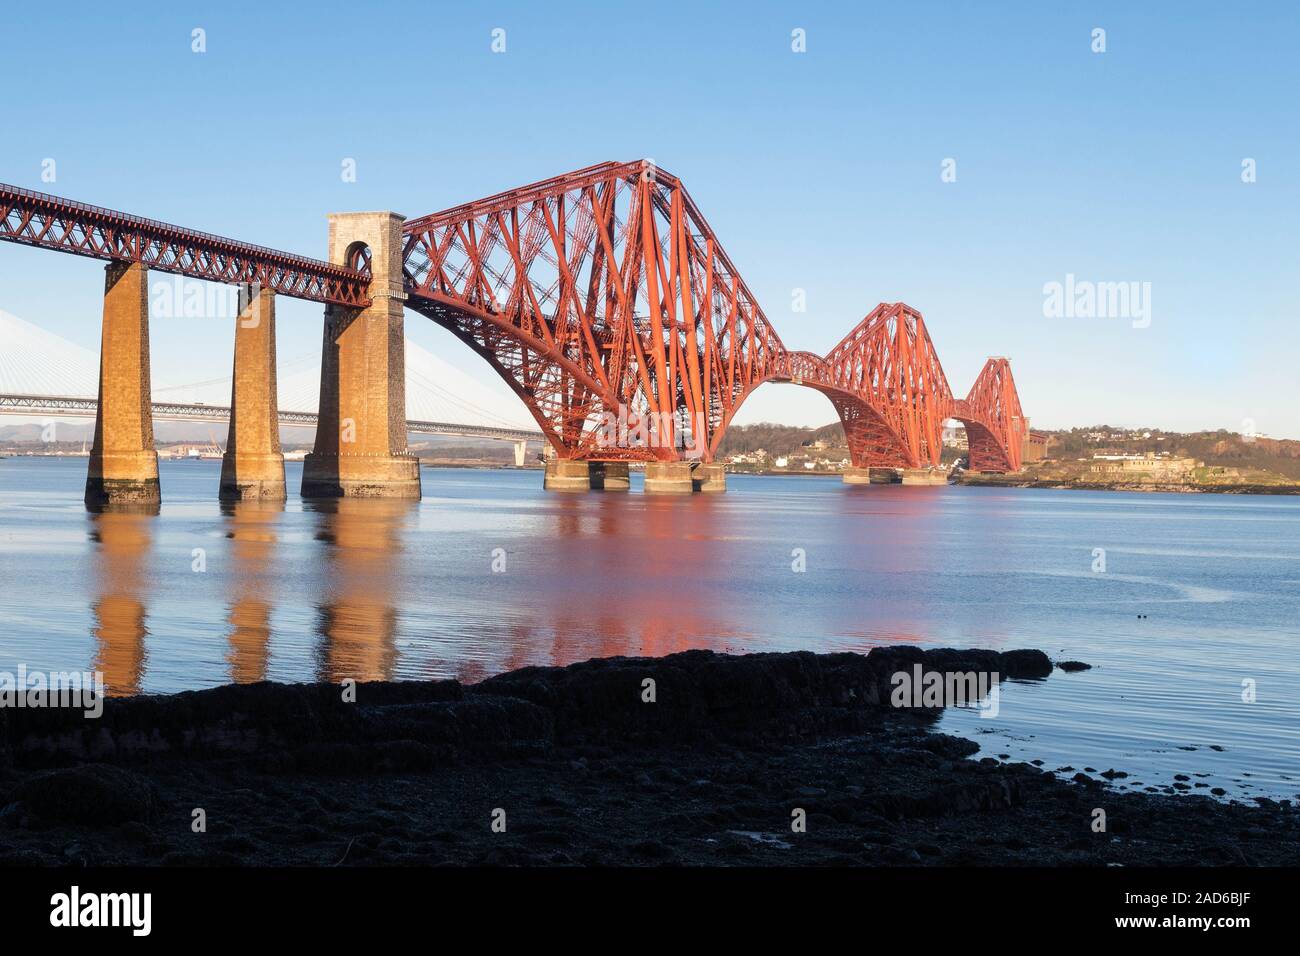 Forth Rail Bridge, South Queensferry, Firth of Forth, Scotland, UK Stock Photo